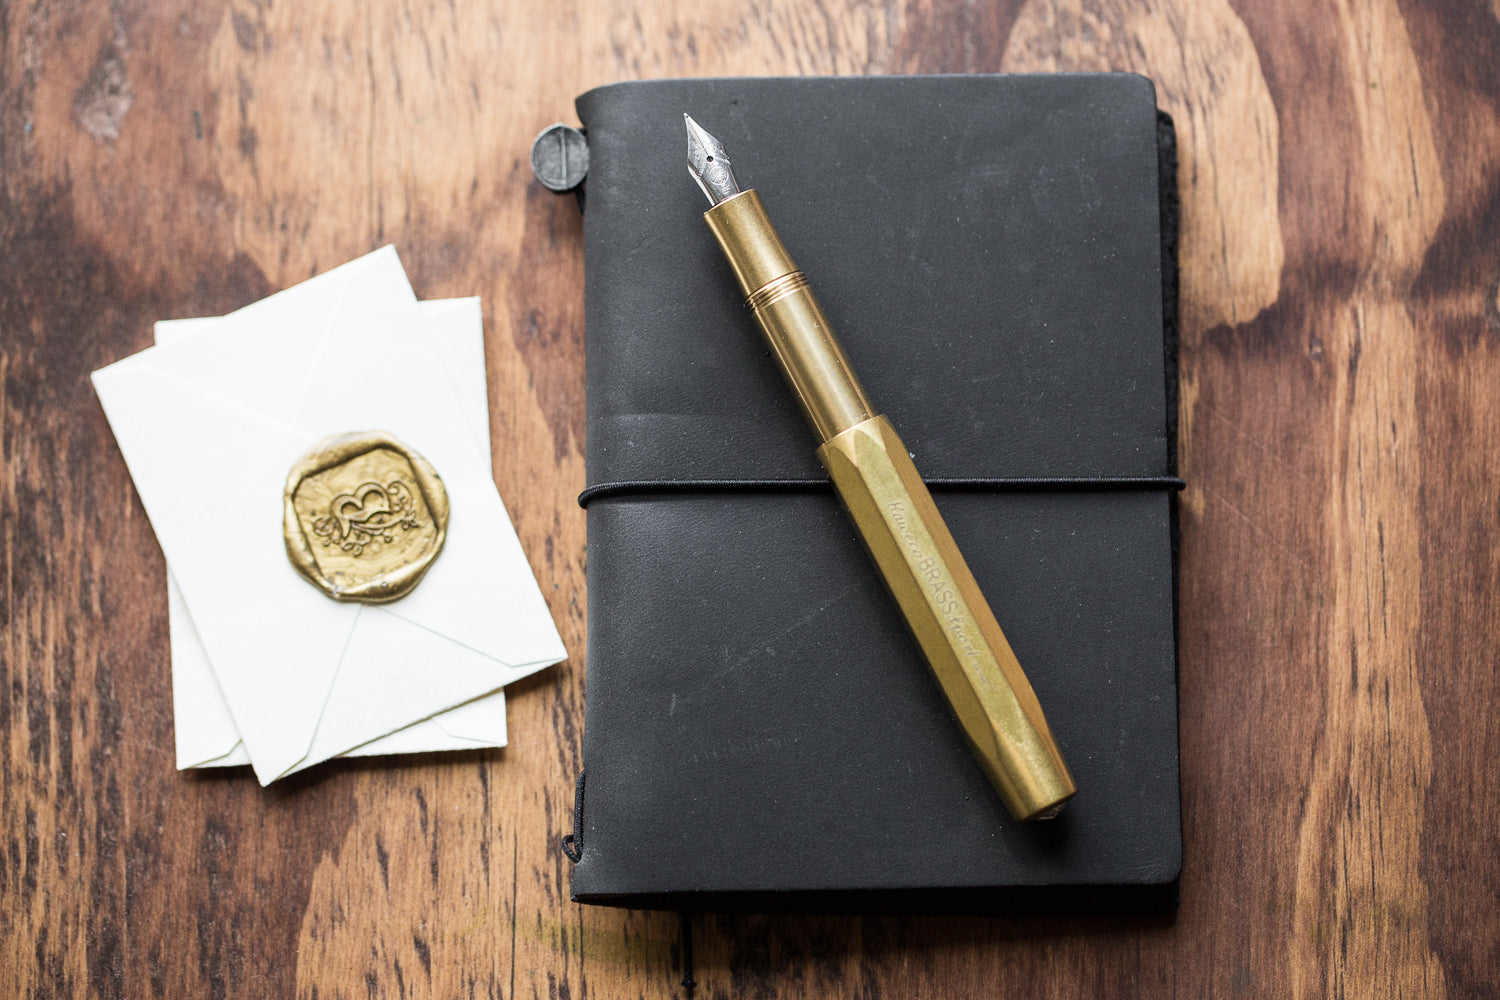 Kaweco Brass Sport Fountain Pen - Broad – Duly Noted Stationery